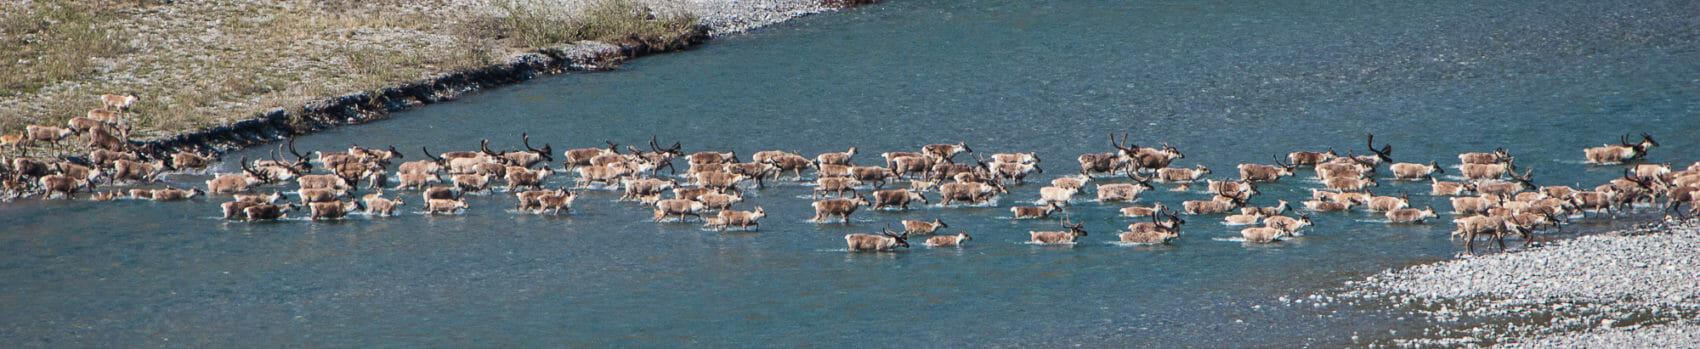 porcupine caribou herd swims across the kongakut river in the arctic refuge of alaska